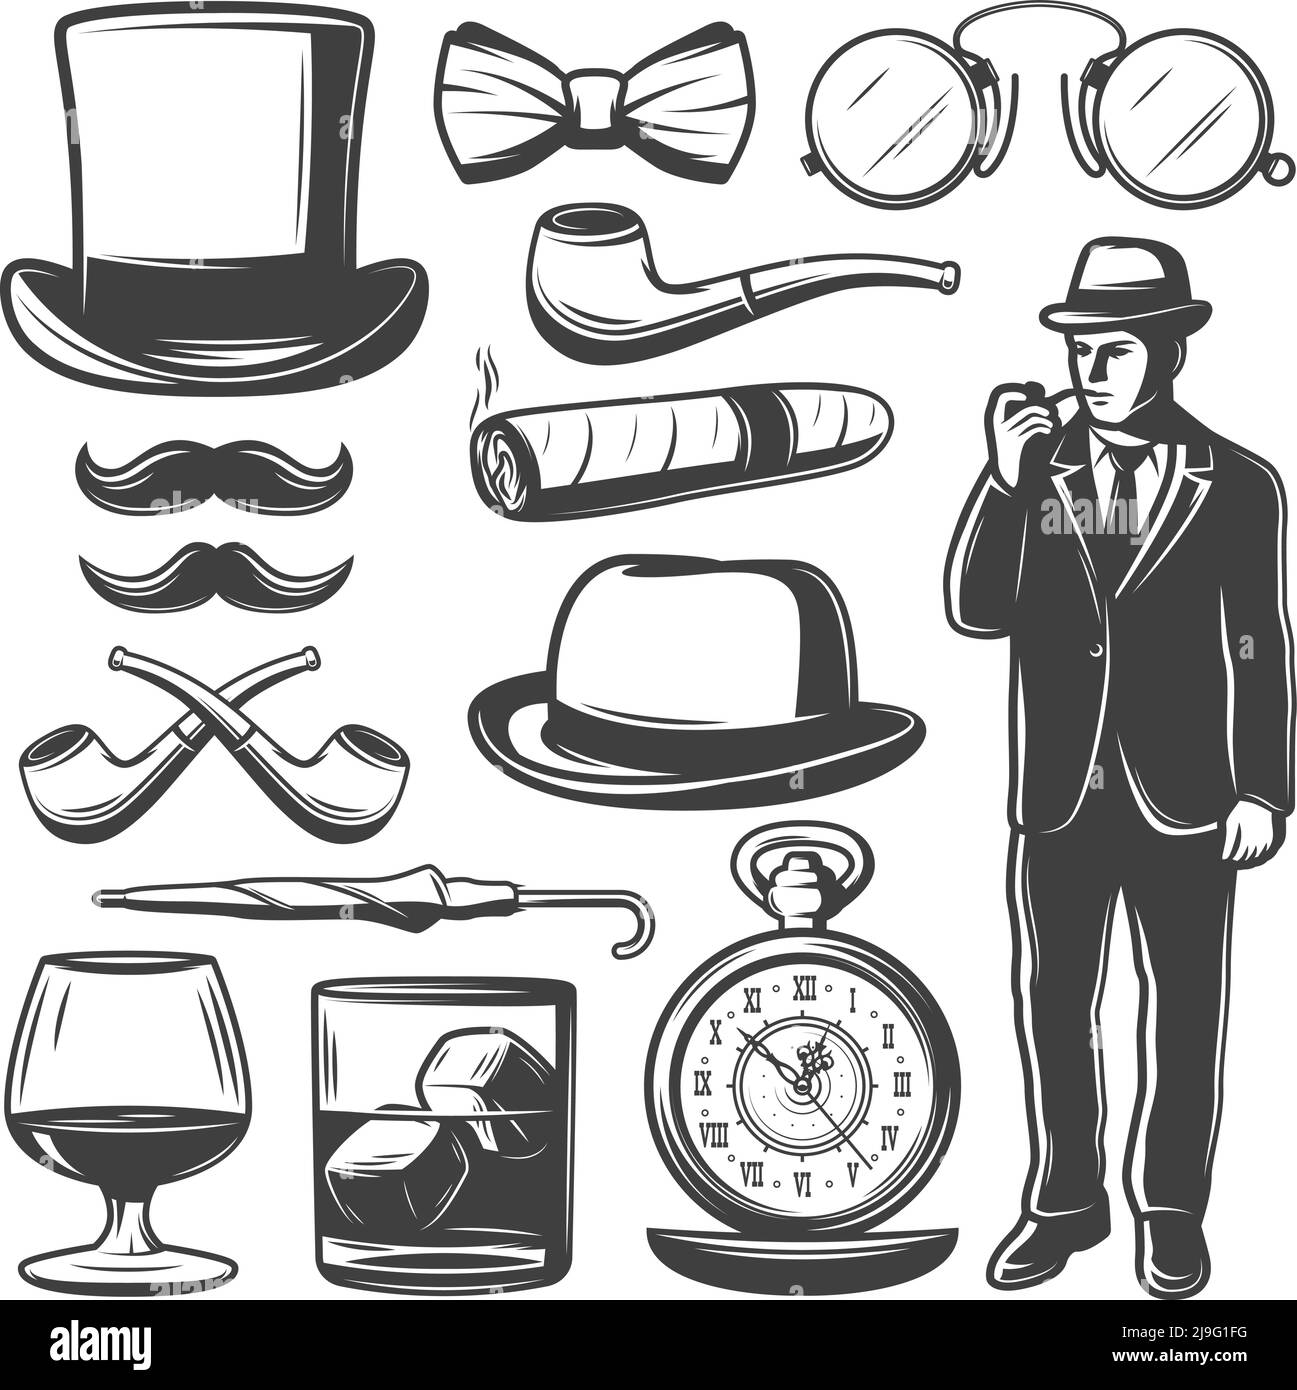 Vintage gentleman elements set with man bowler hat bow tie mustache umbrella clocks drinks glasses smoking pipe cigar isolated vector illustration Stock Vector